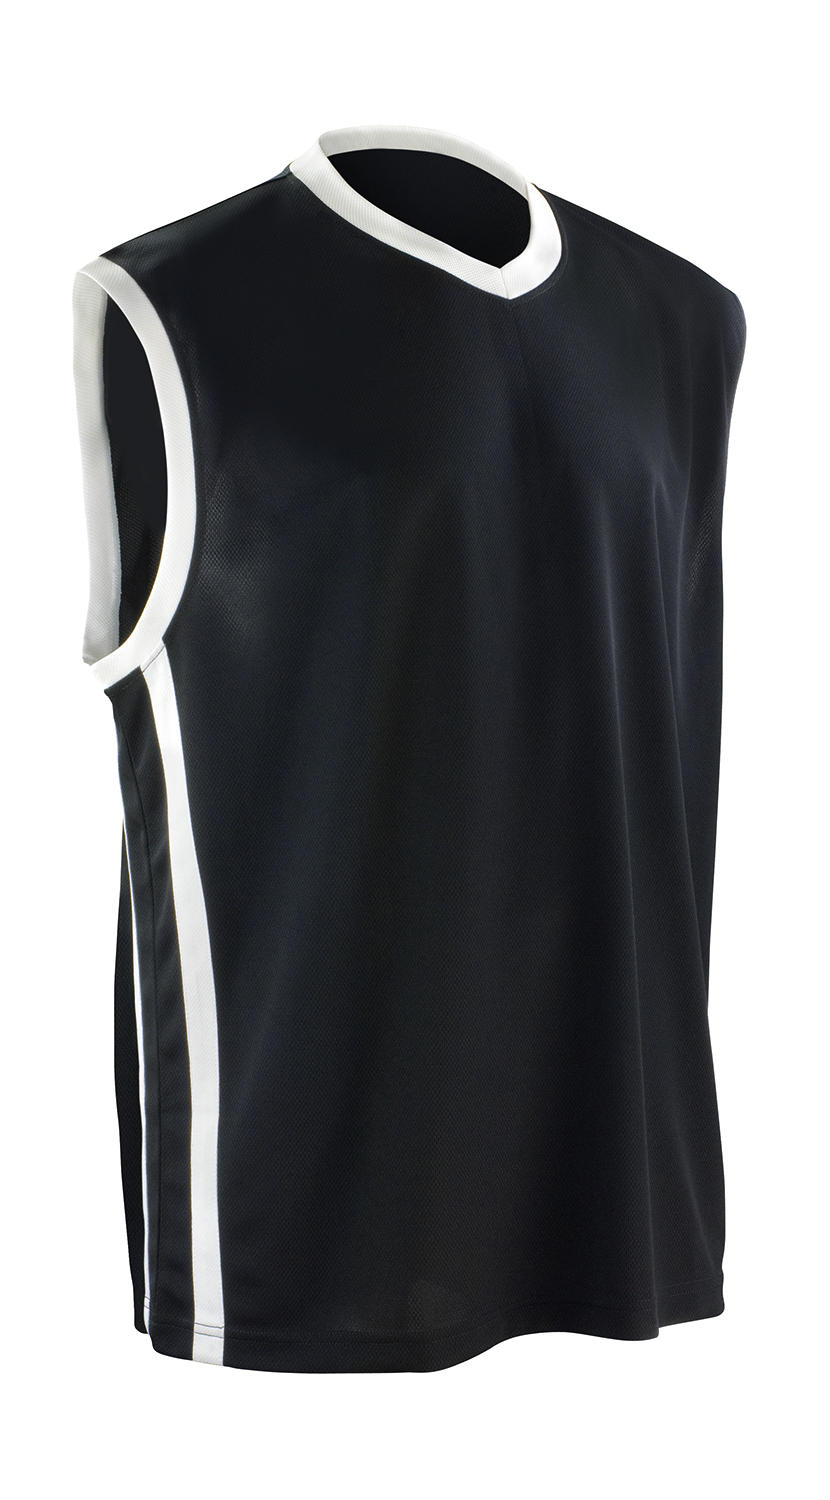  Mens Quick Dry Basketball Top in Farbe Black/White